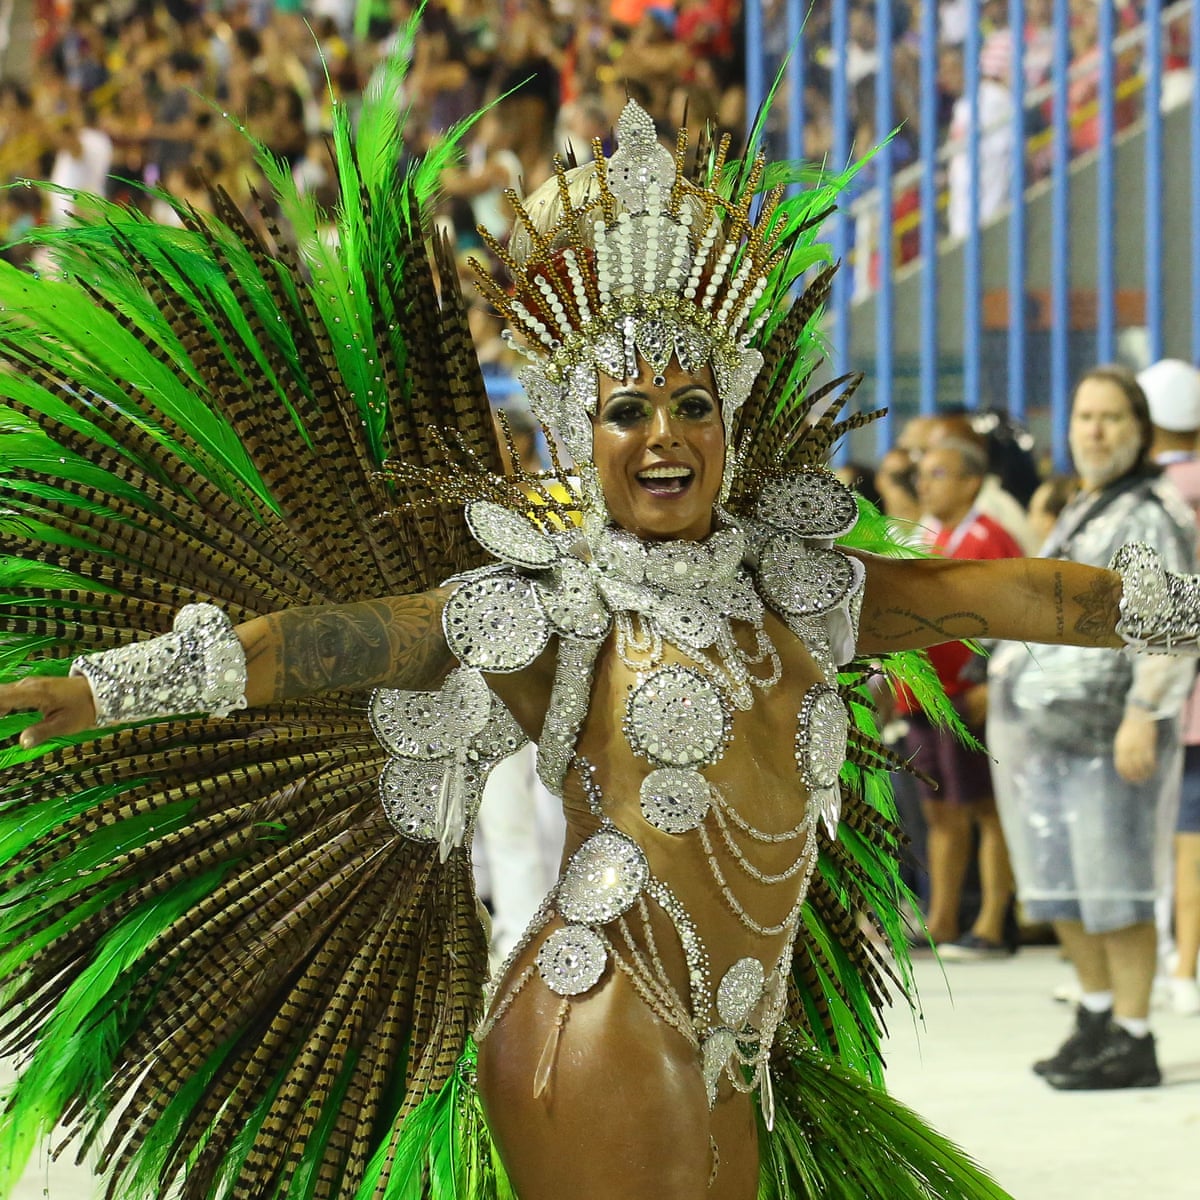 It S All So Cheerless Rio Mourns Loss Of Carnival S Noise And Passion Rio De Janeiro The Guardian